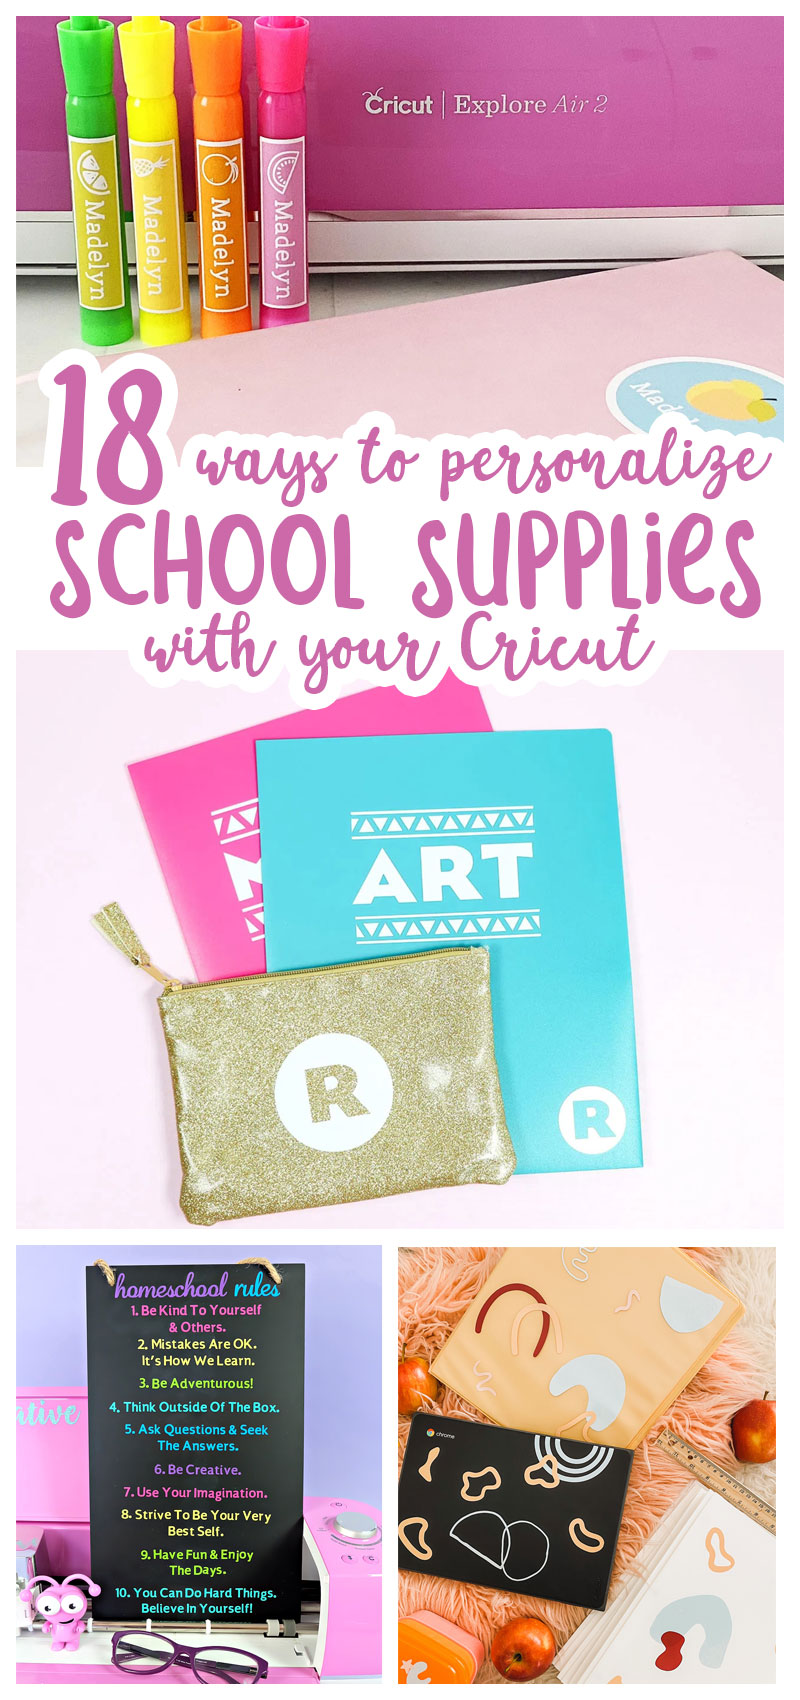 Craft supplies you didn't know you needed – Cricut Inspiration